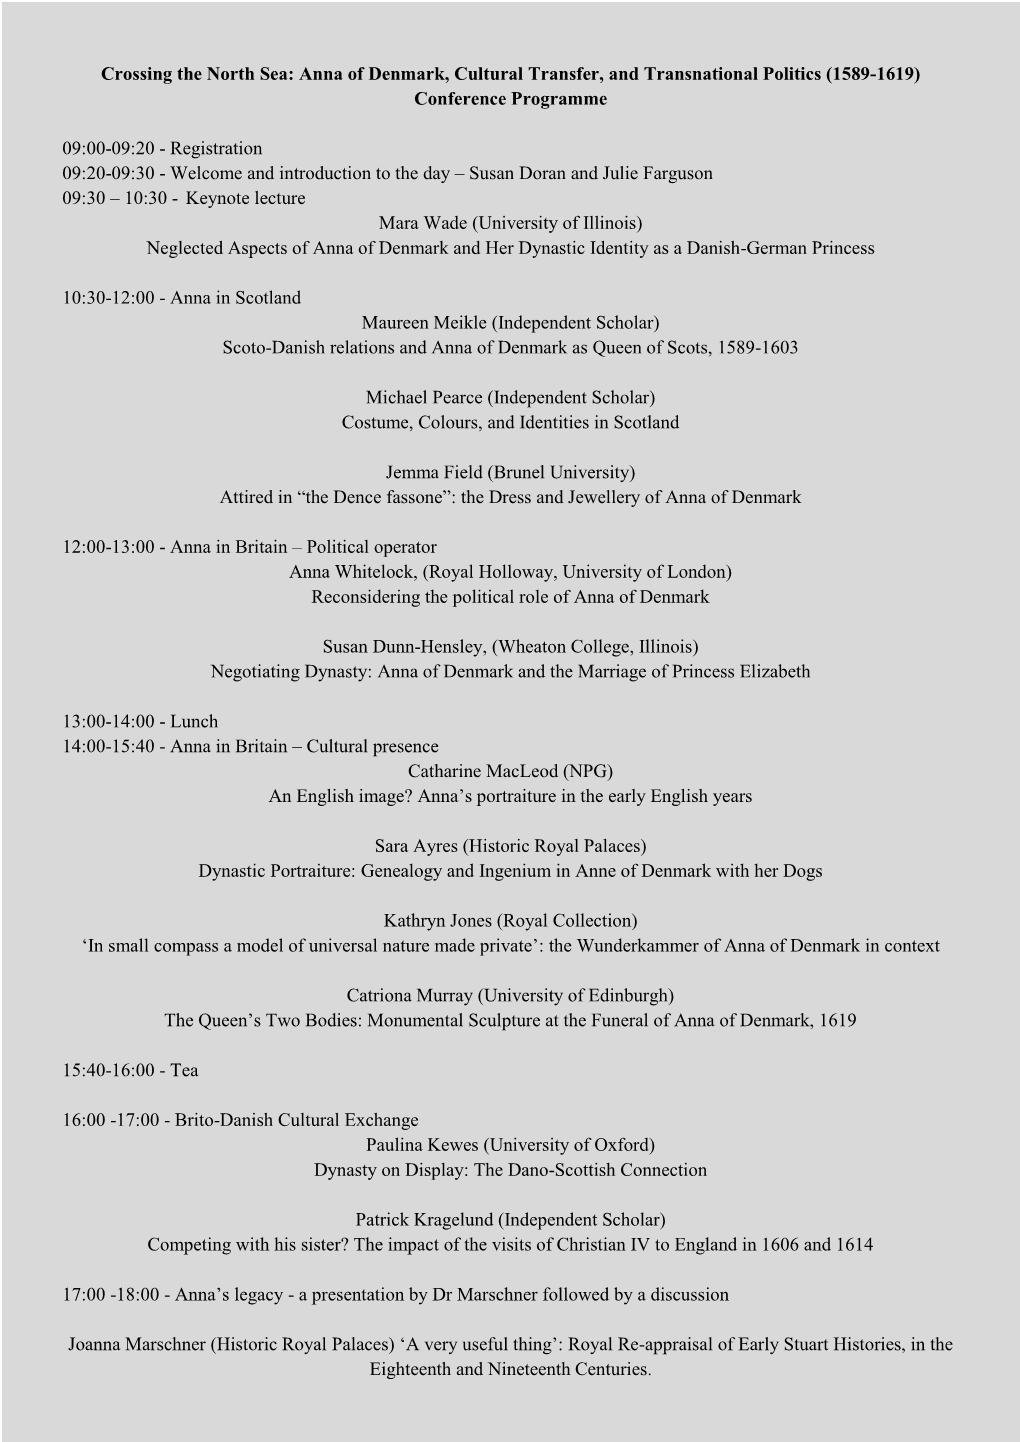 Crossing the North Sea: Anna of Denmark, Cultural Transfer, and Transnational Politics (1589-1619) Conference Programme